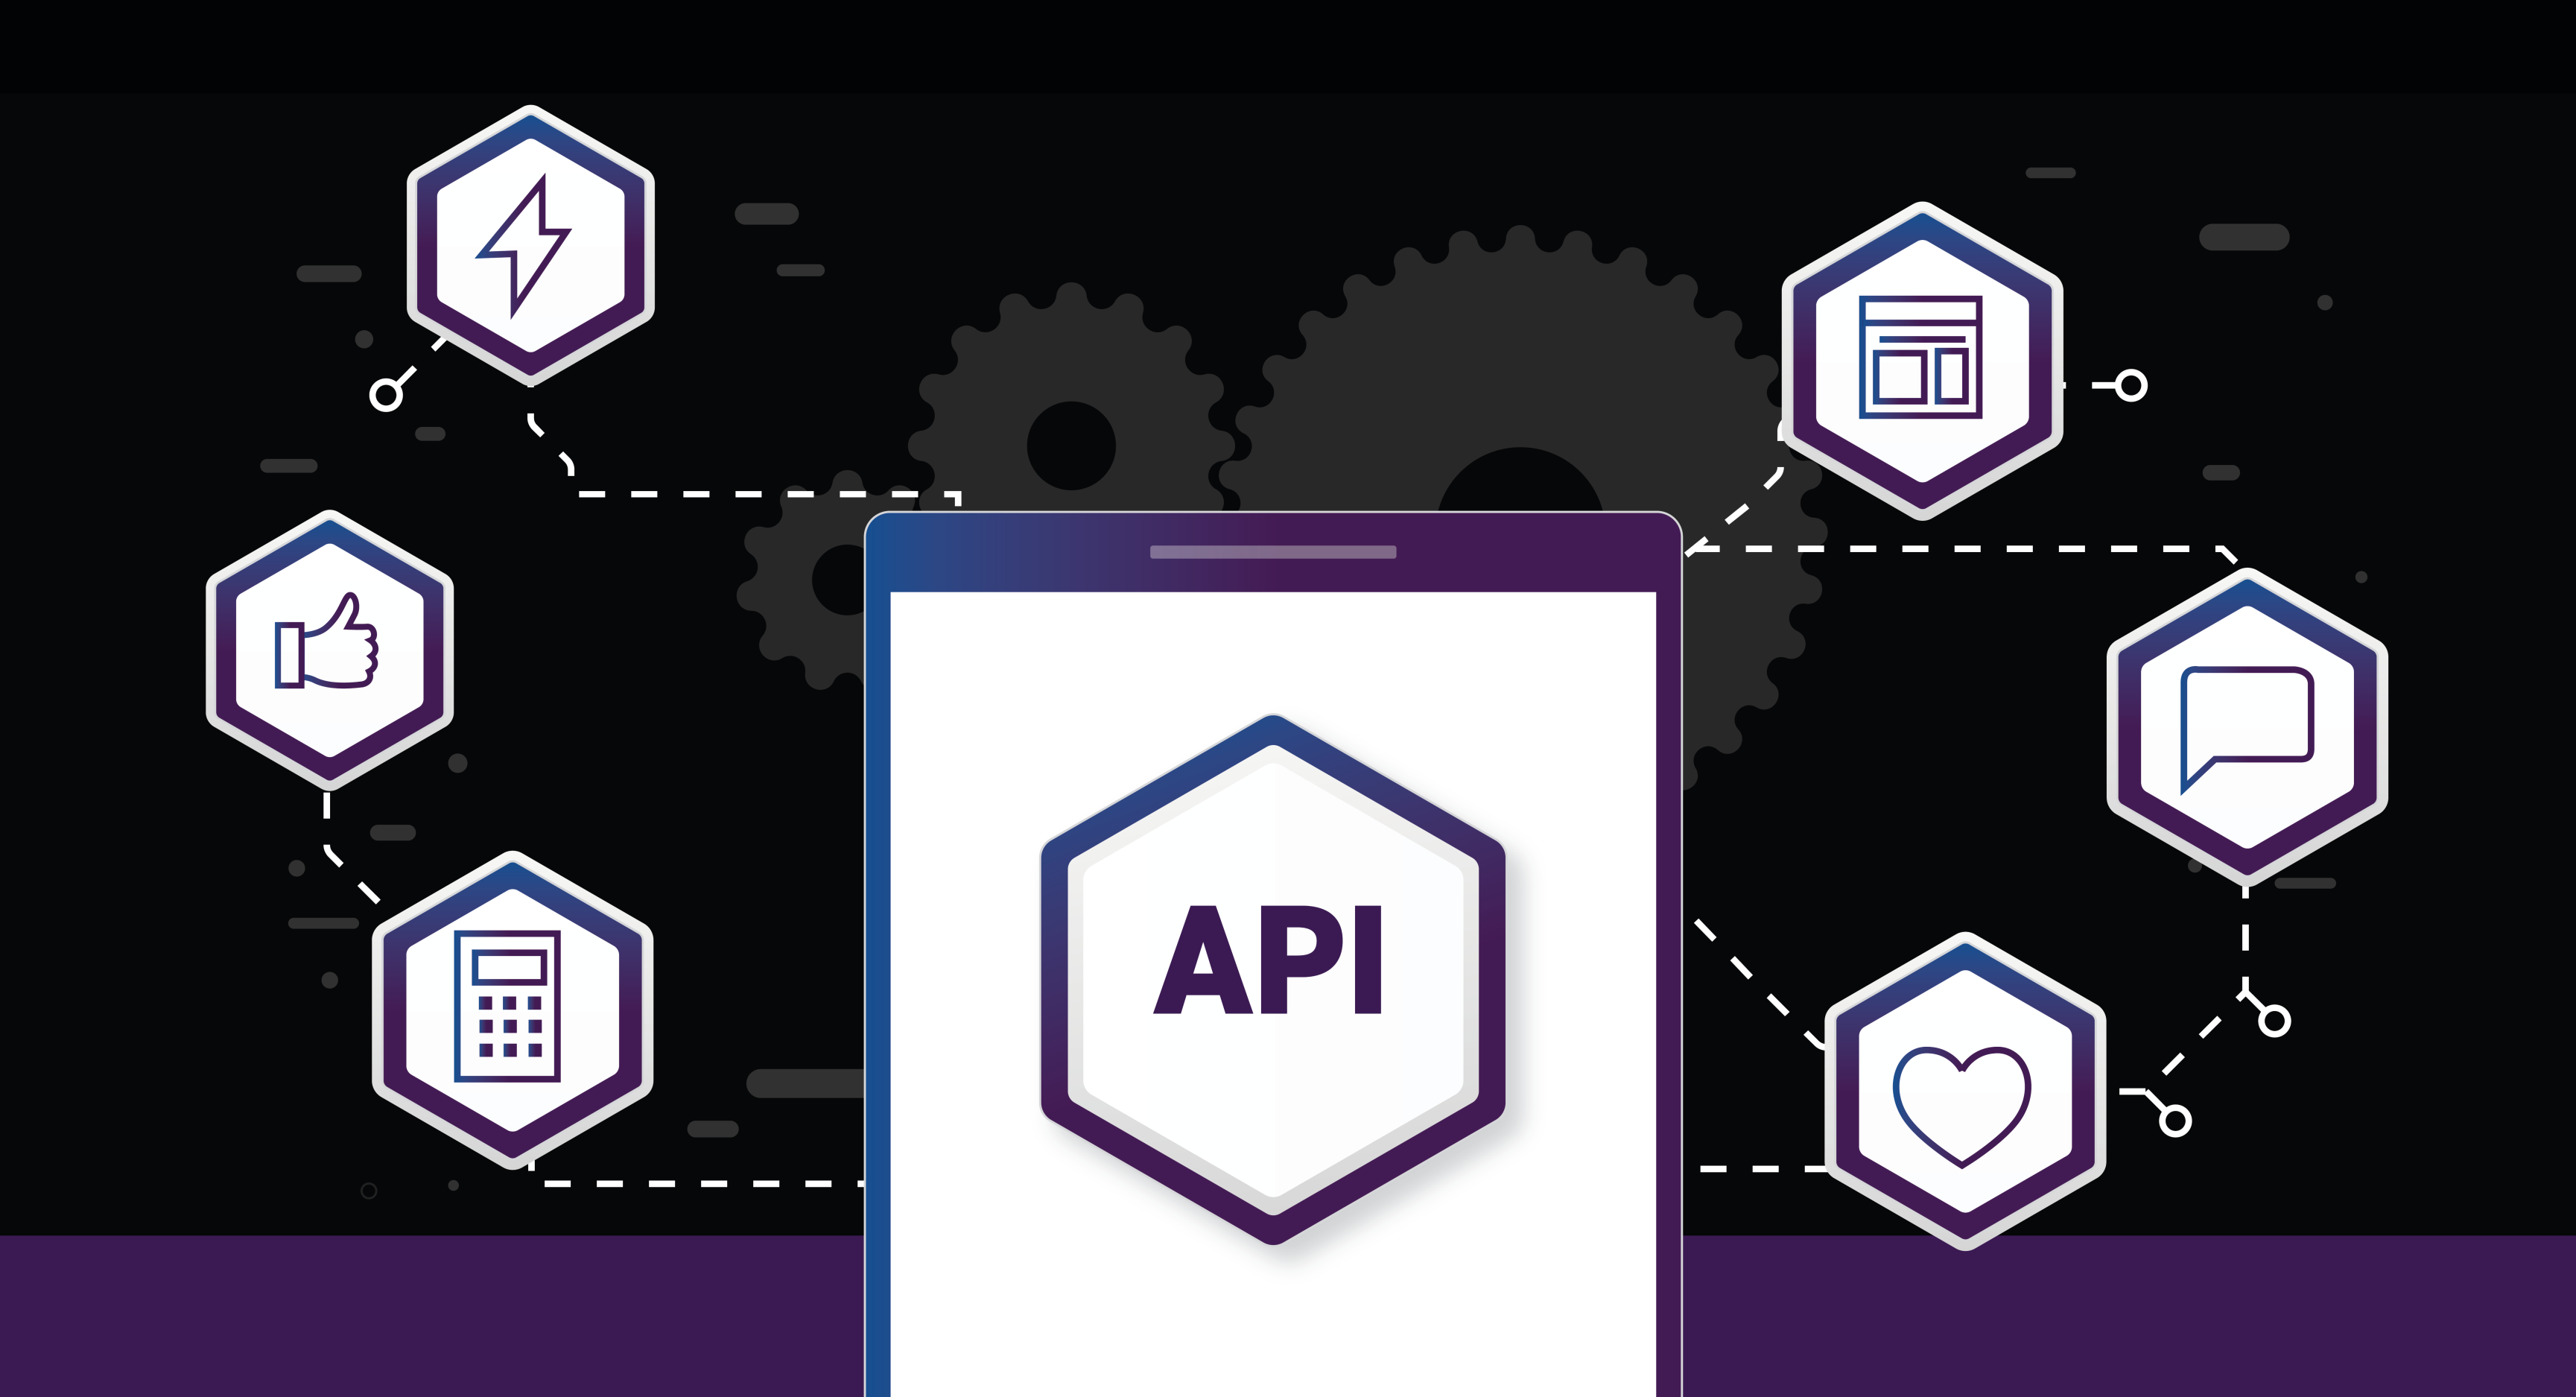 diagram of API surrounded by innovation, technology icons